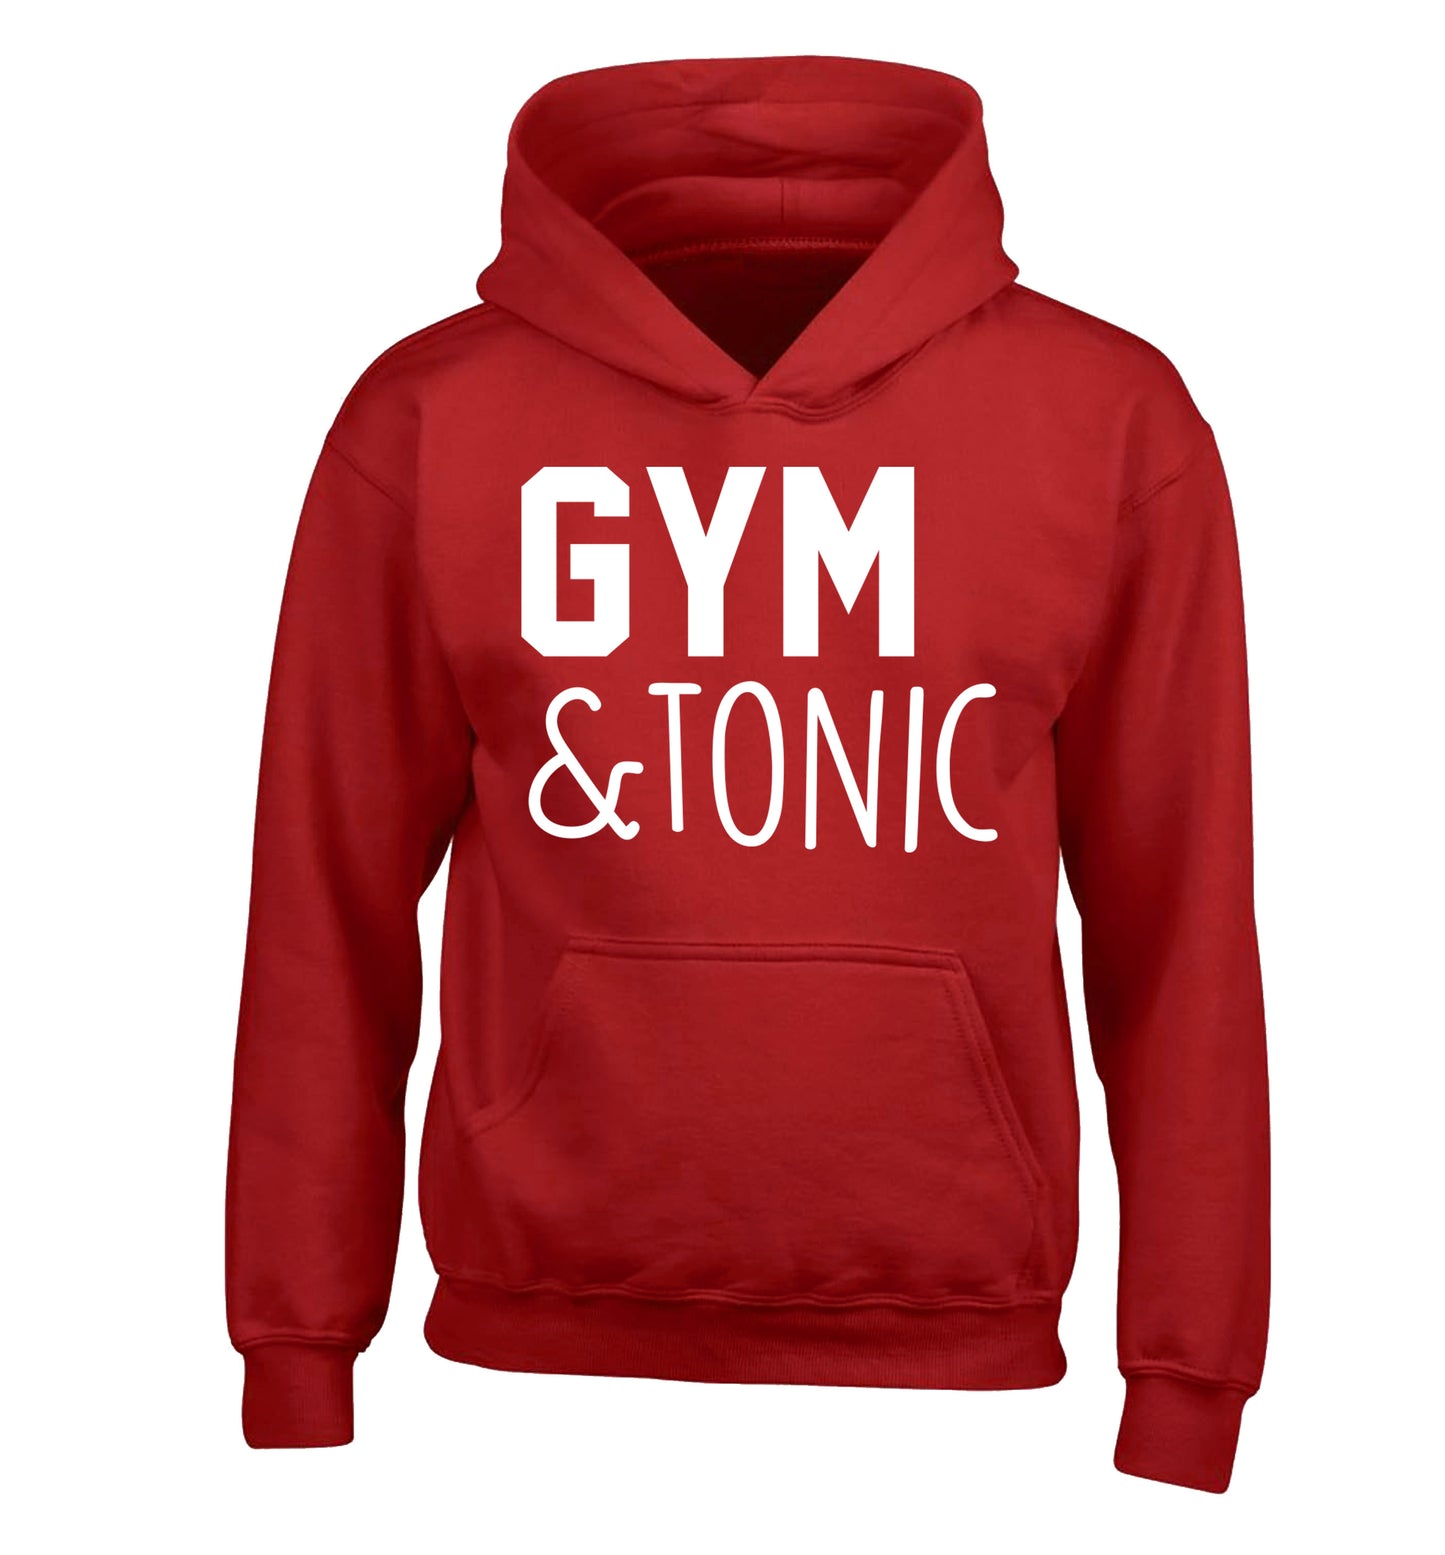 Gym and tonic children's red hoodie 12-14 Years